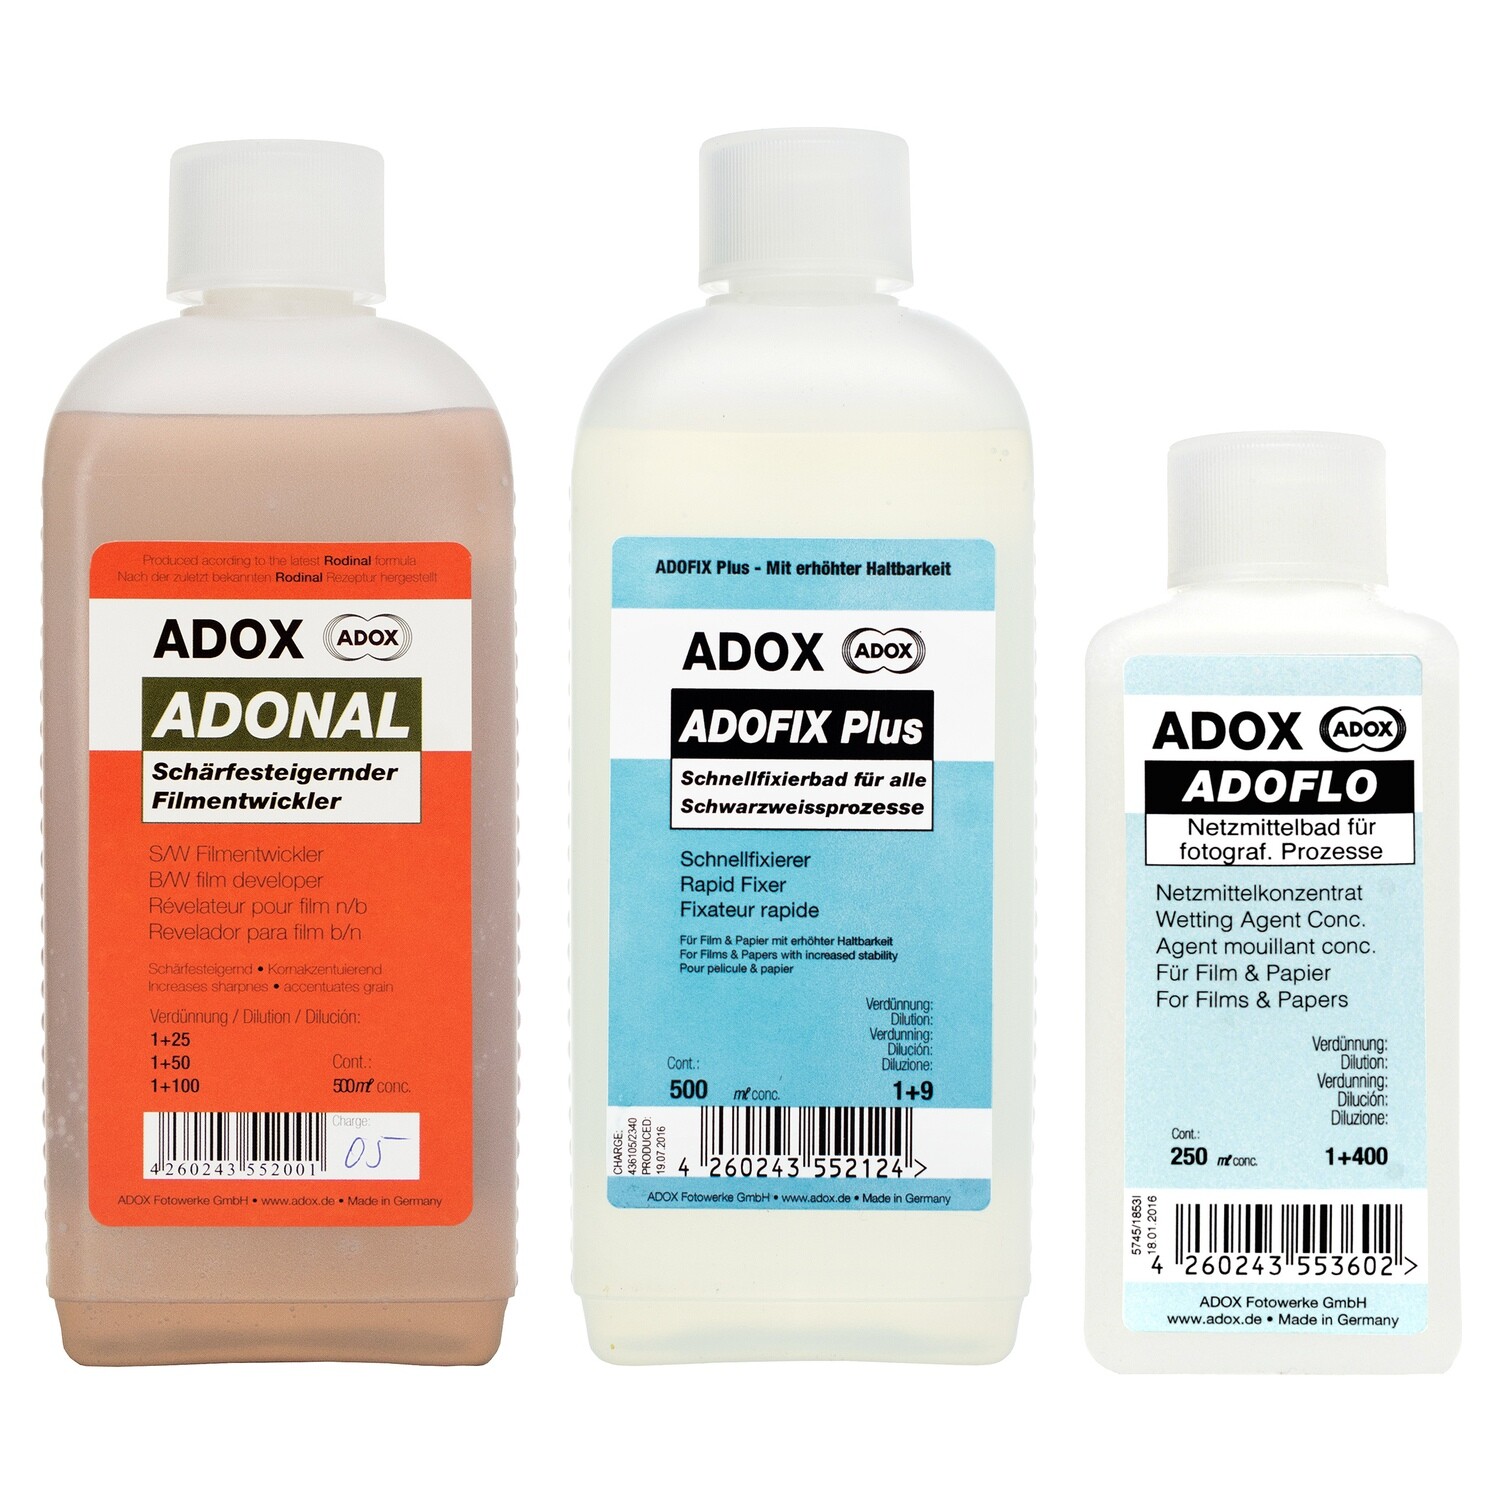 Kit consisting of ADOX RODINAL 500 ml concentrate + ADOX ADOFIX Plus express fixative 500 ml concentrate + ADOX ADOFLO II wetting agent 100 ml concentrate